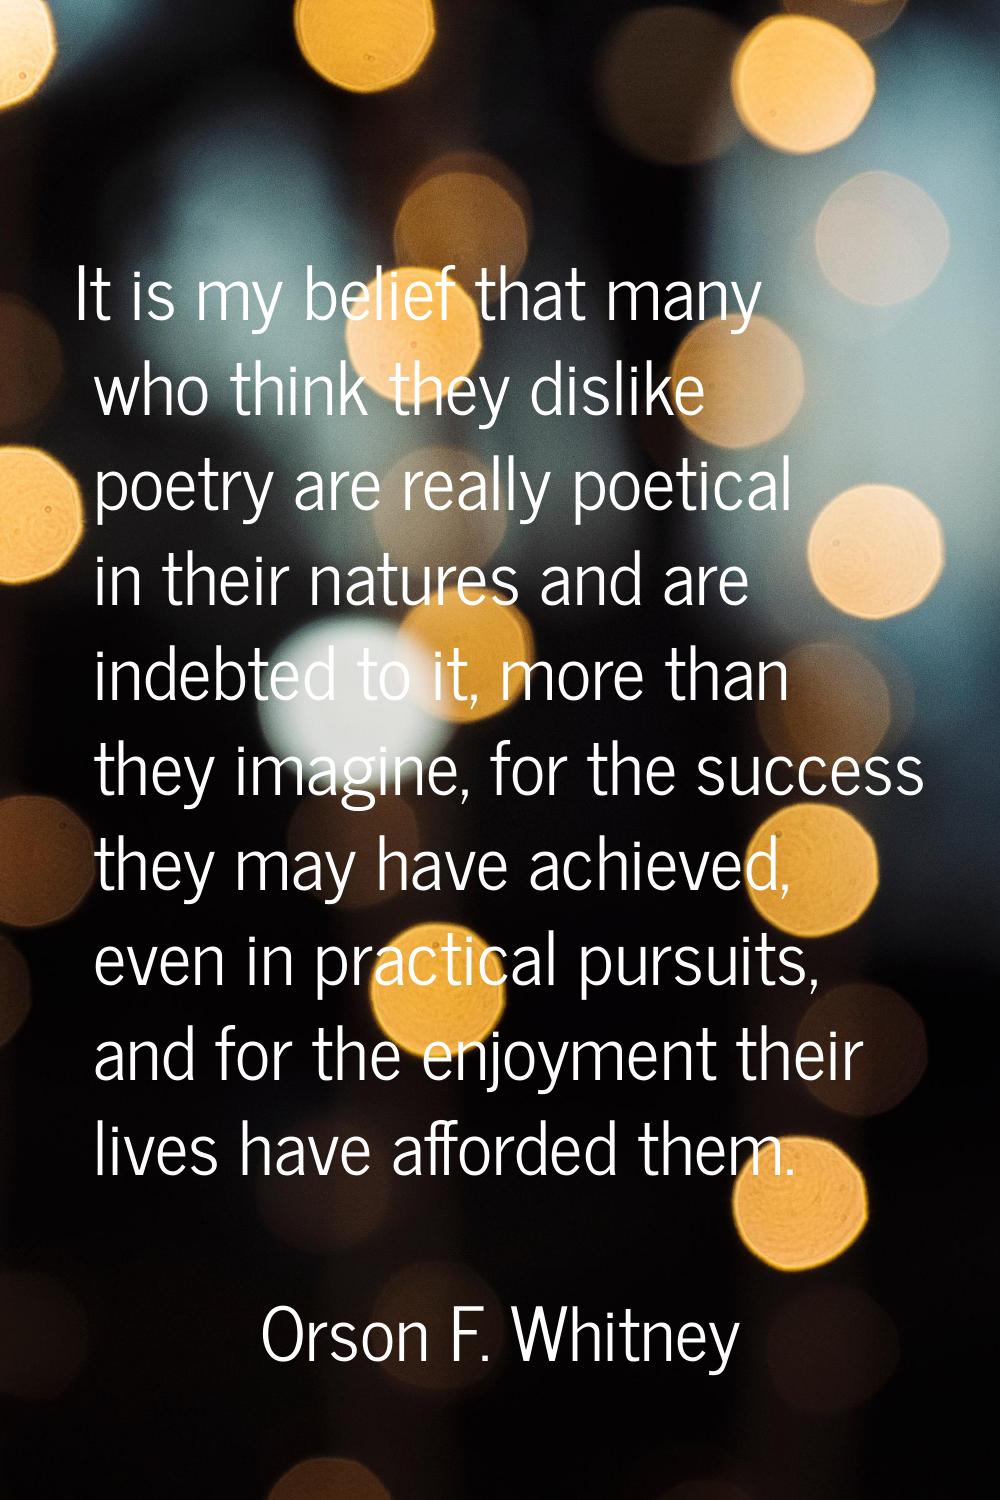 It is my belief that many who think they dislike poetry are really poetical in their natures and ar